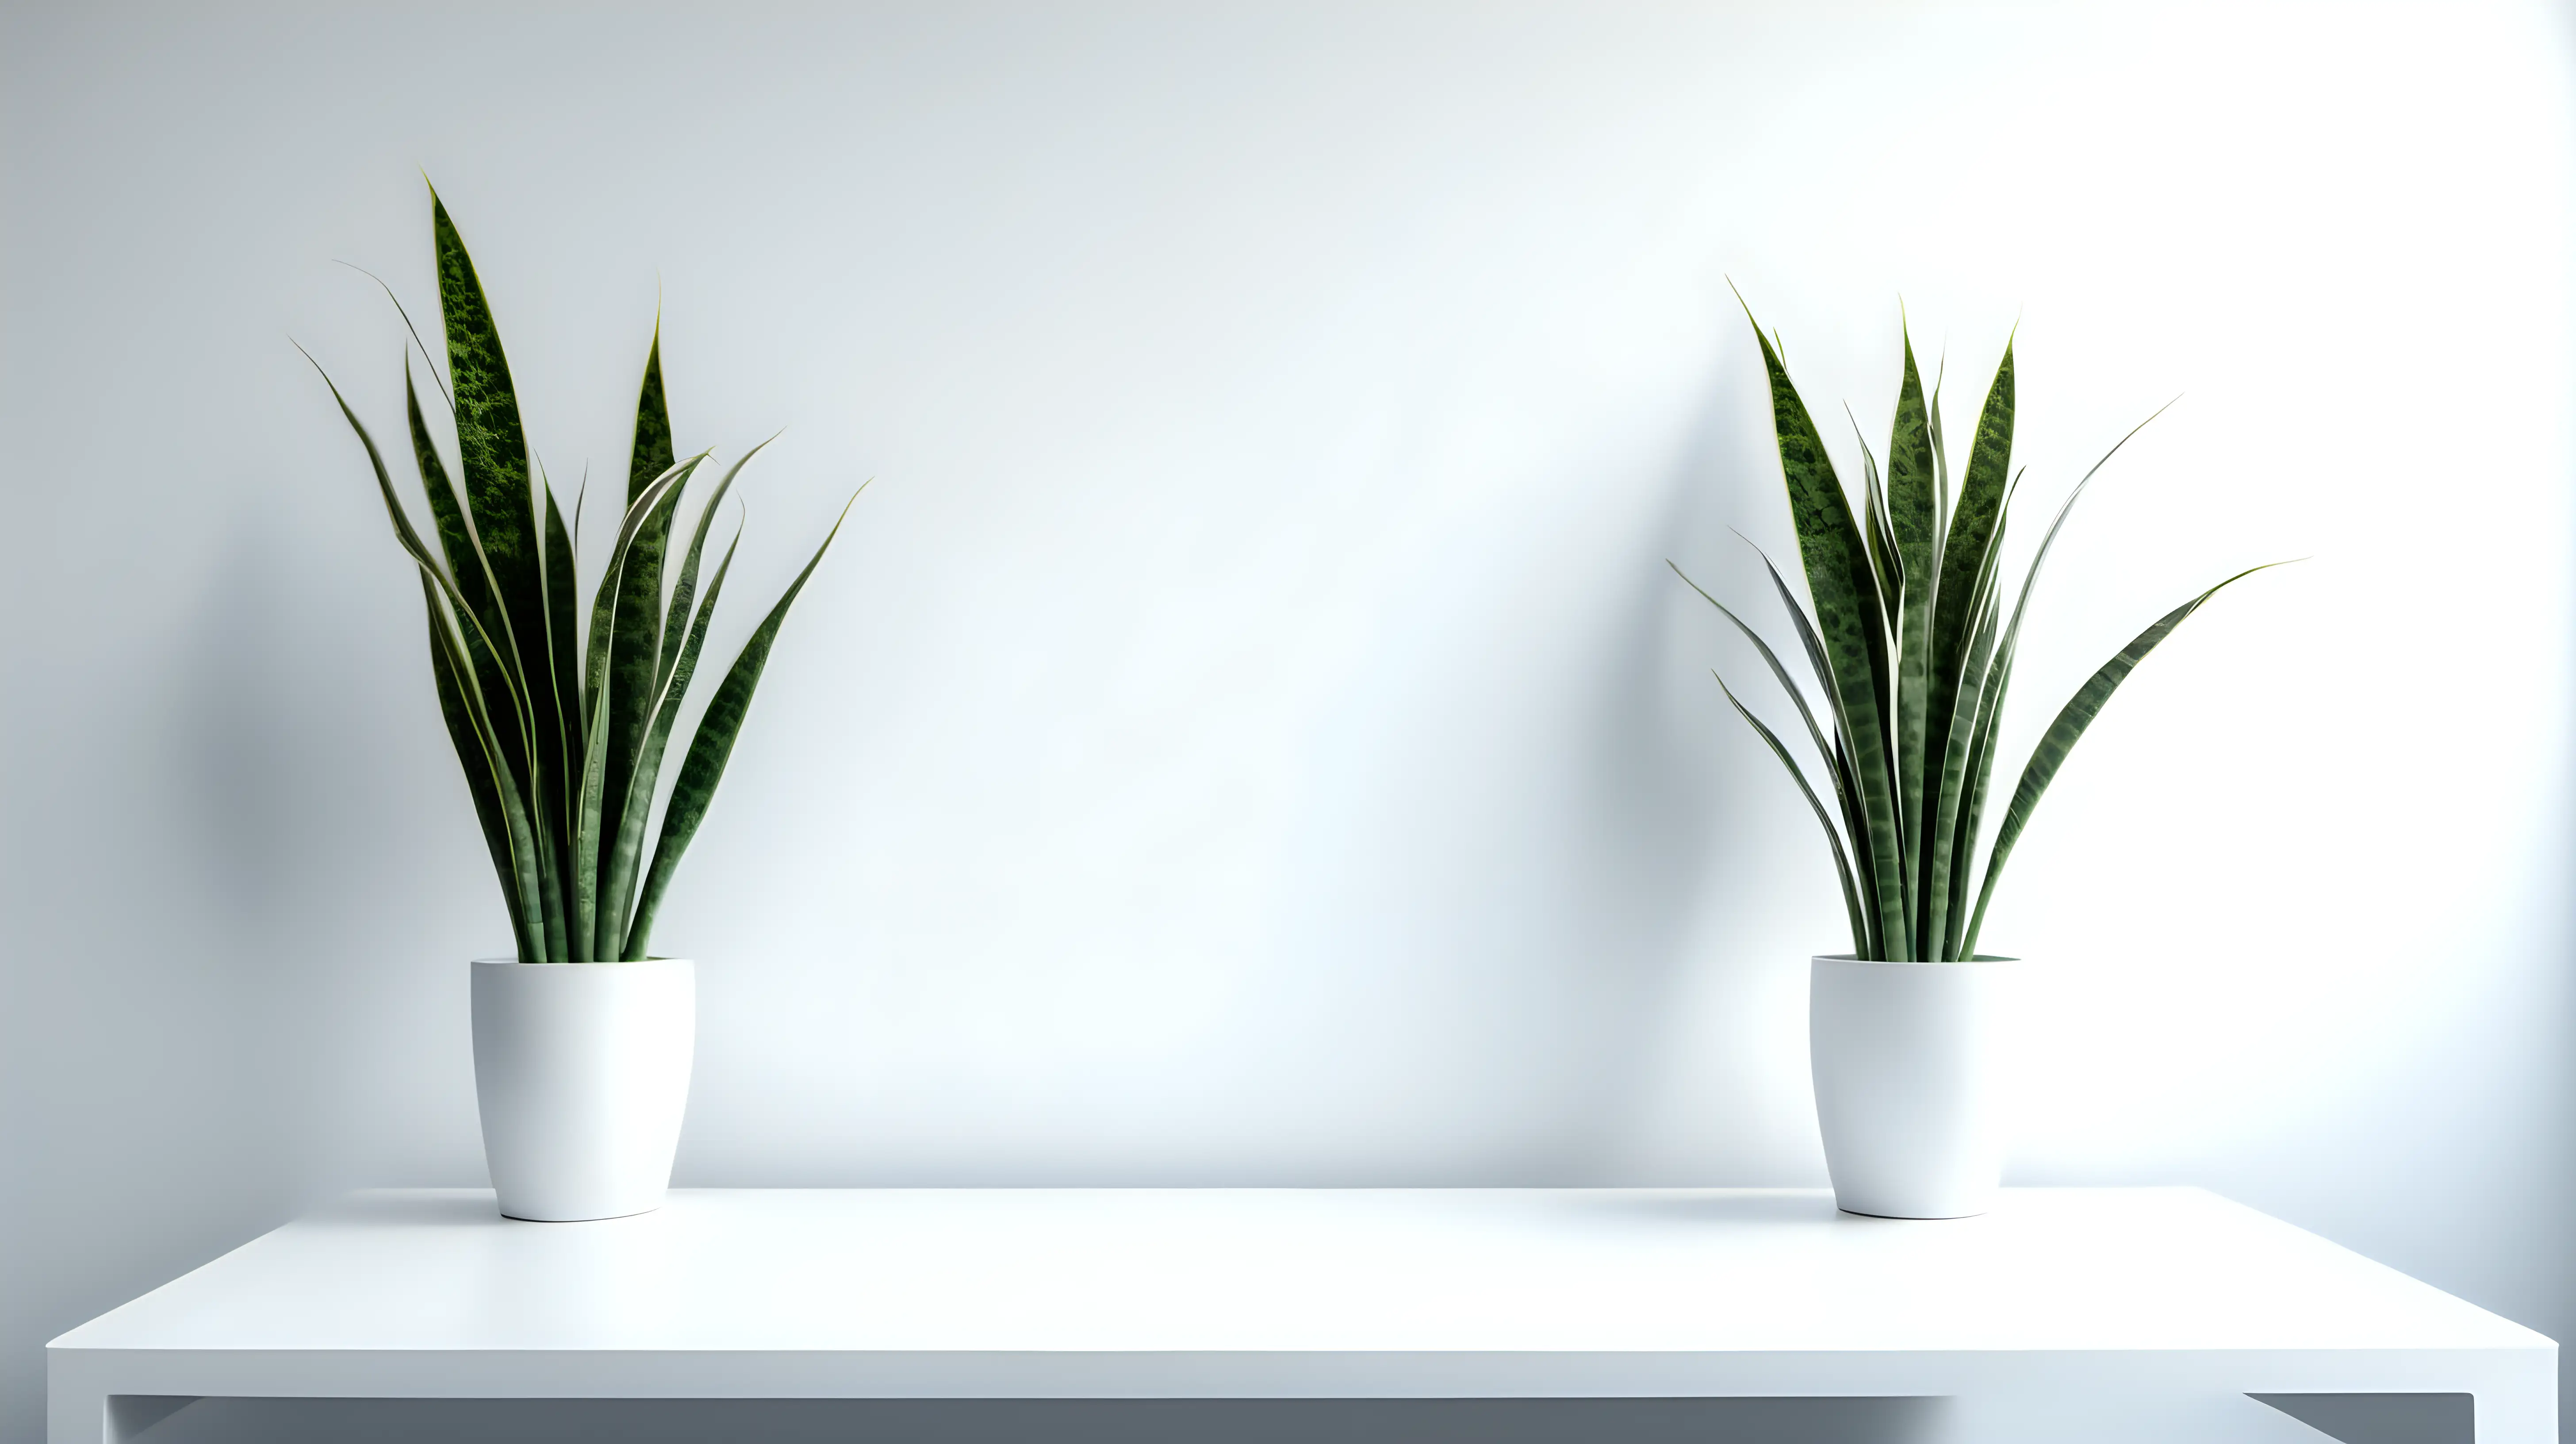 Empty white clear wall. Working desk in front of the wall. Two the same snake plants, one on the left and one on the right. Futuristic, minimalistic, artistic. Closer to the wall. Closeup. Long desk closeup.